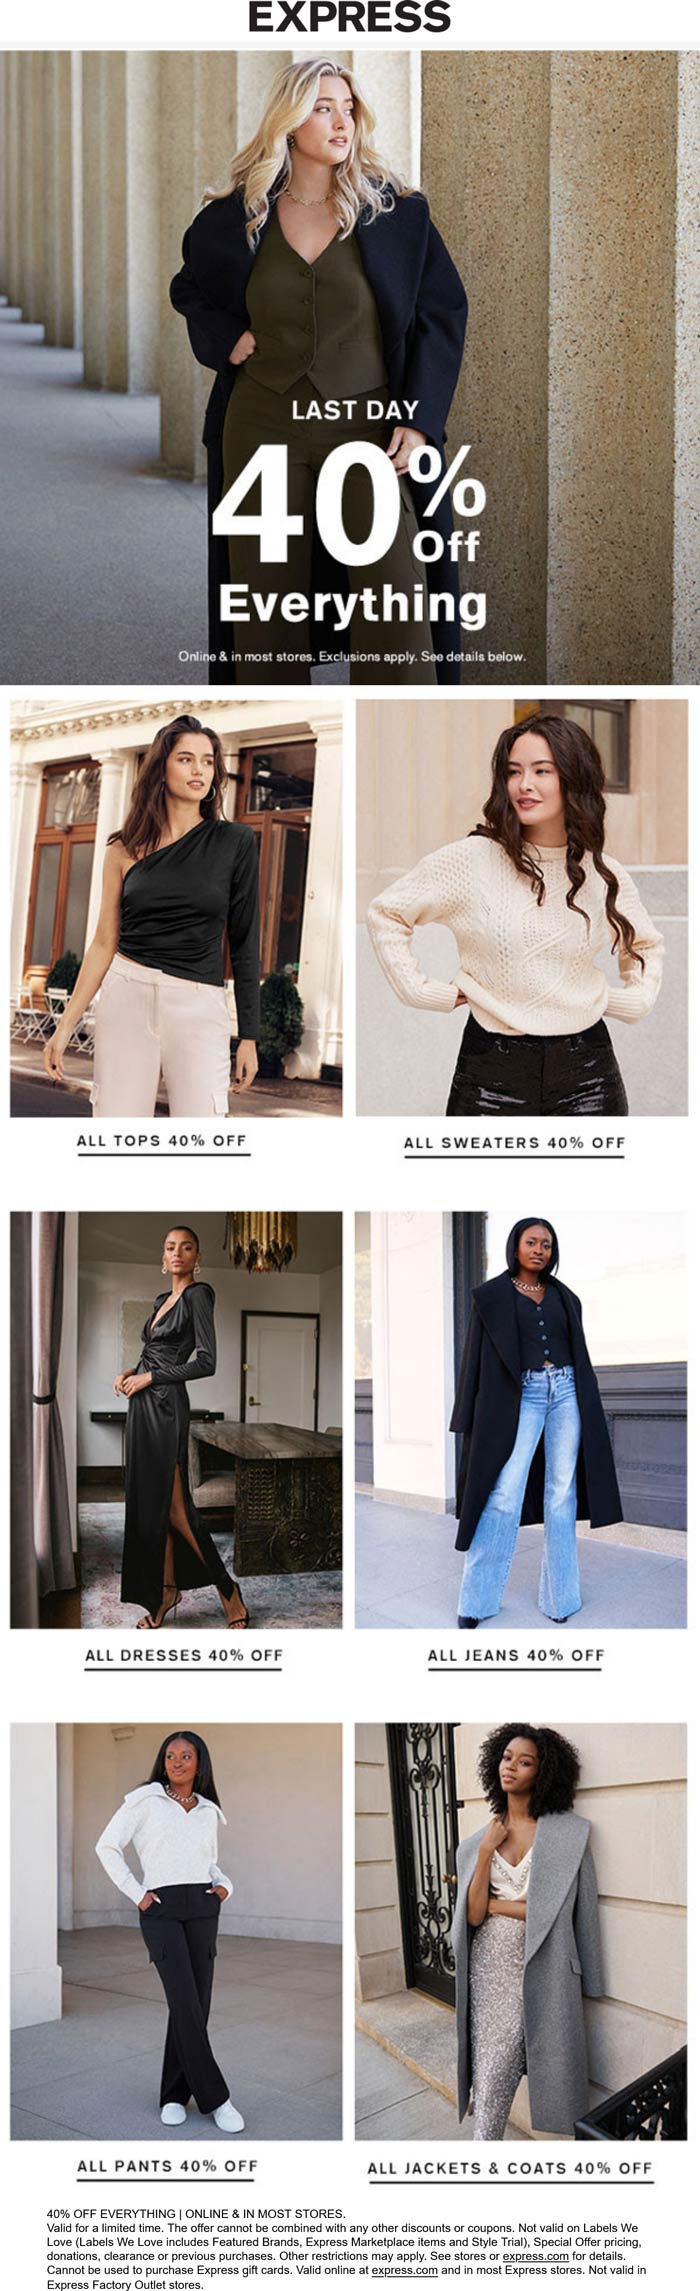 Express stores Coupon  40% off everything today at Express, ditto online #express 